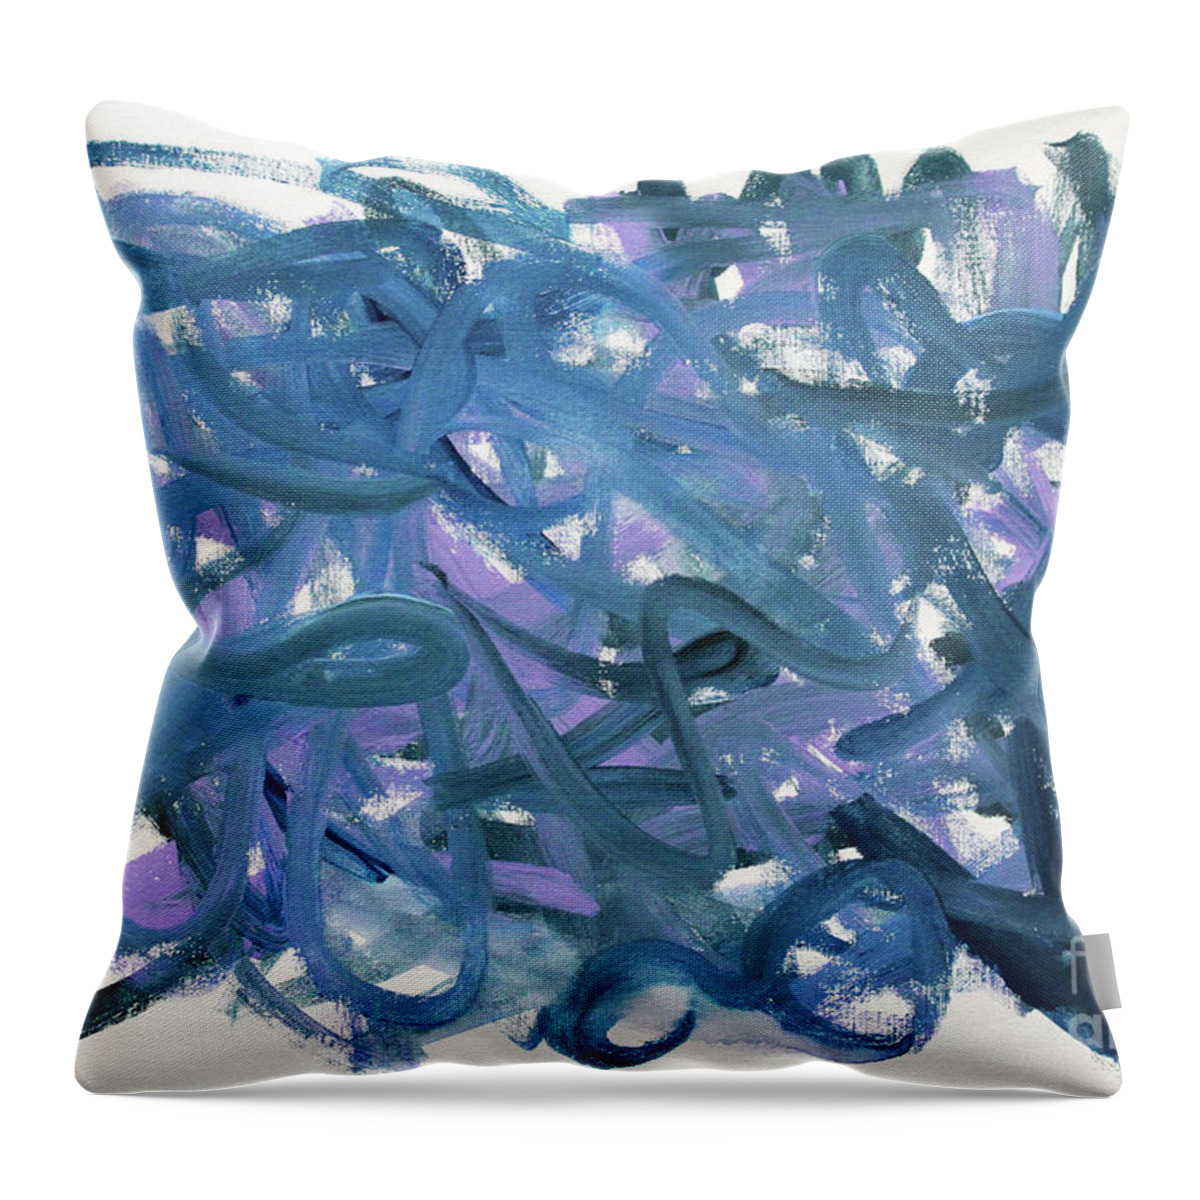 Blue Abstract Throw Pillow featuring the painting Blue Abstract by Megan Dirsa-DuBois